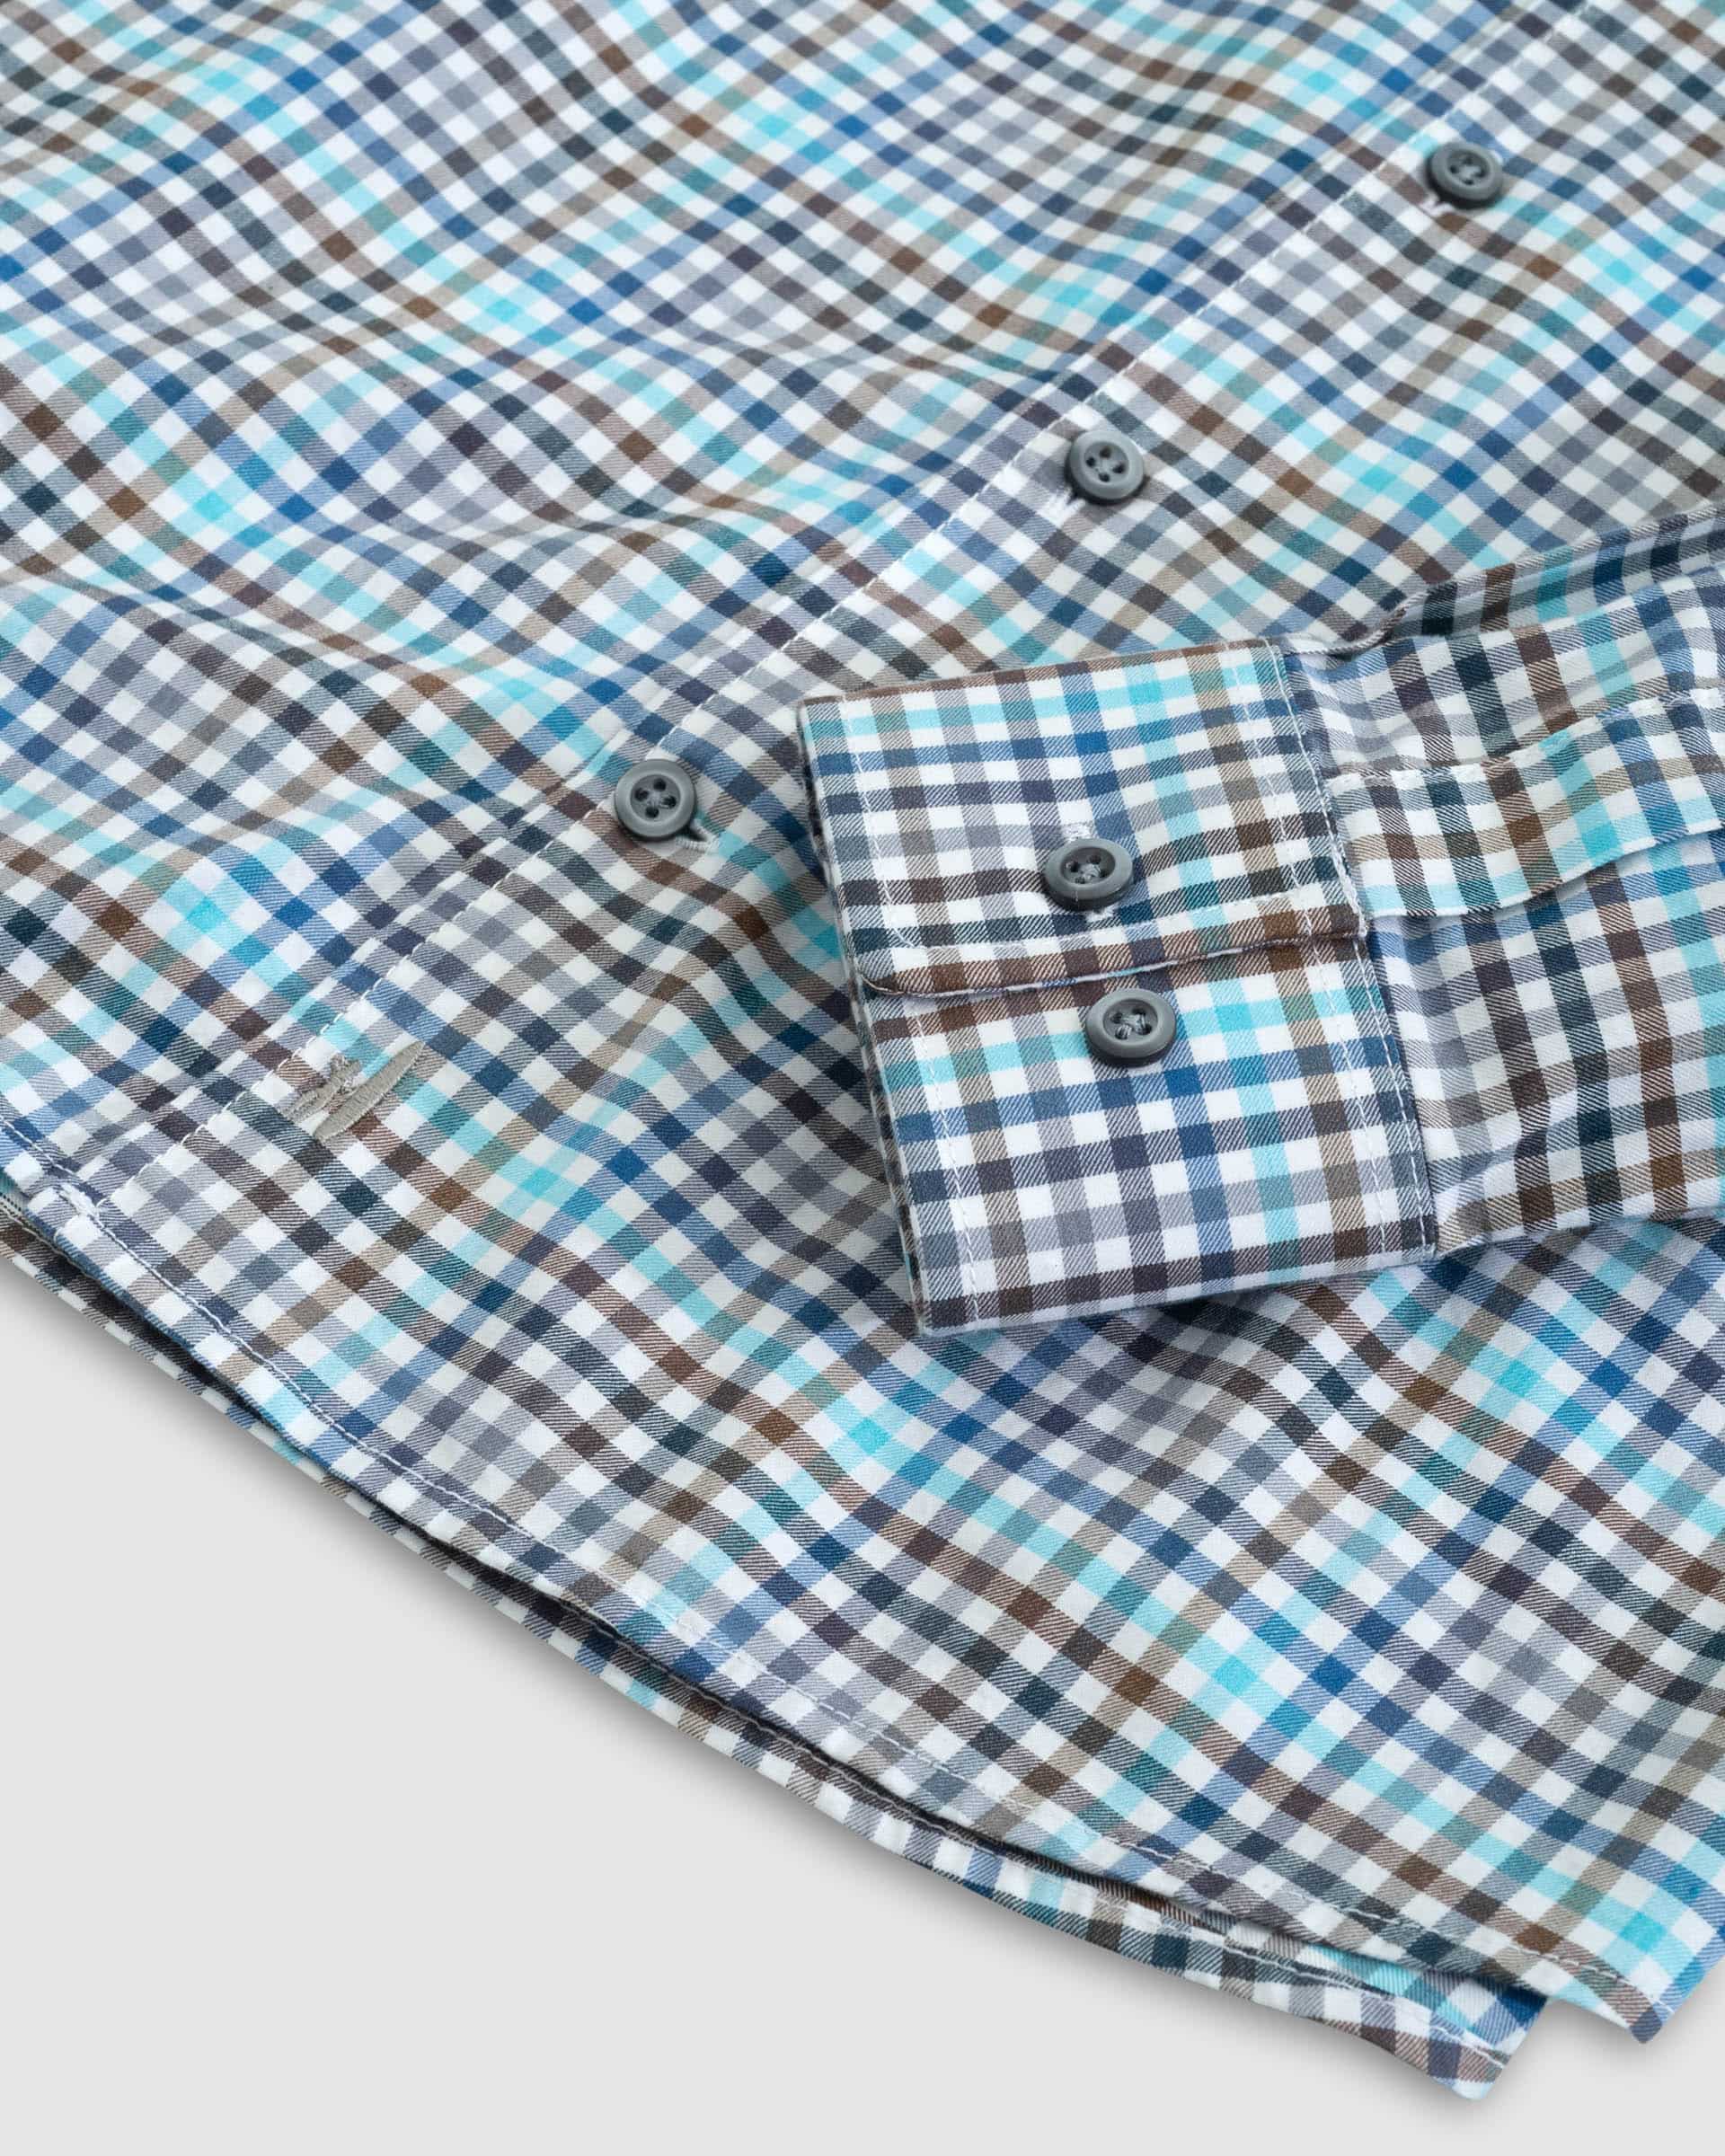 Johnnie-O Todd "Hangin' Out" Button Up Shirt